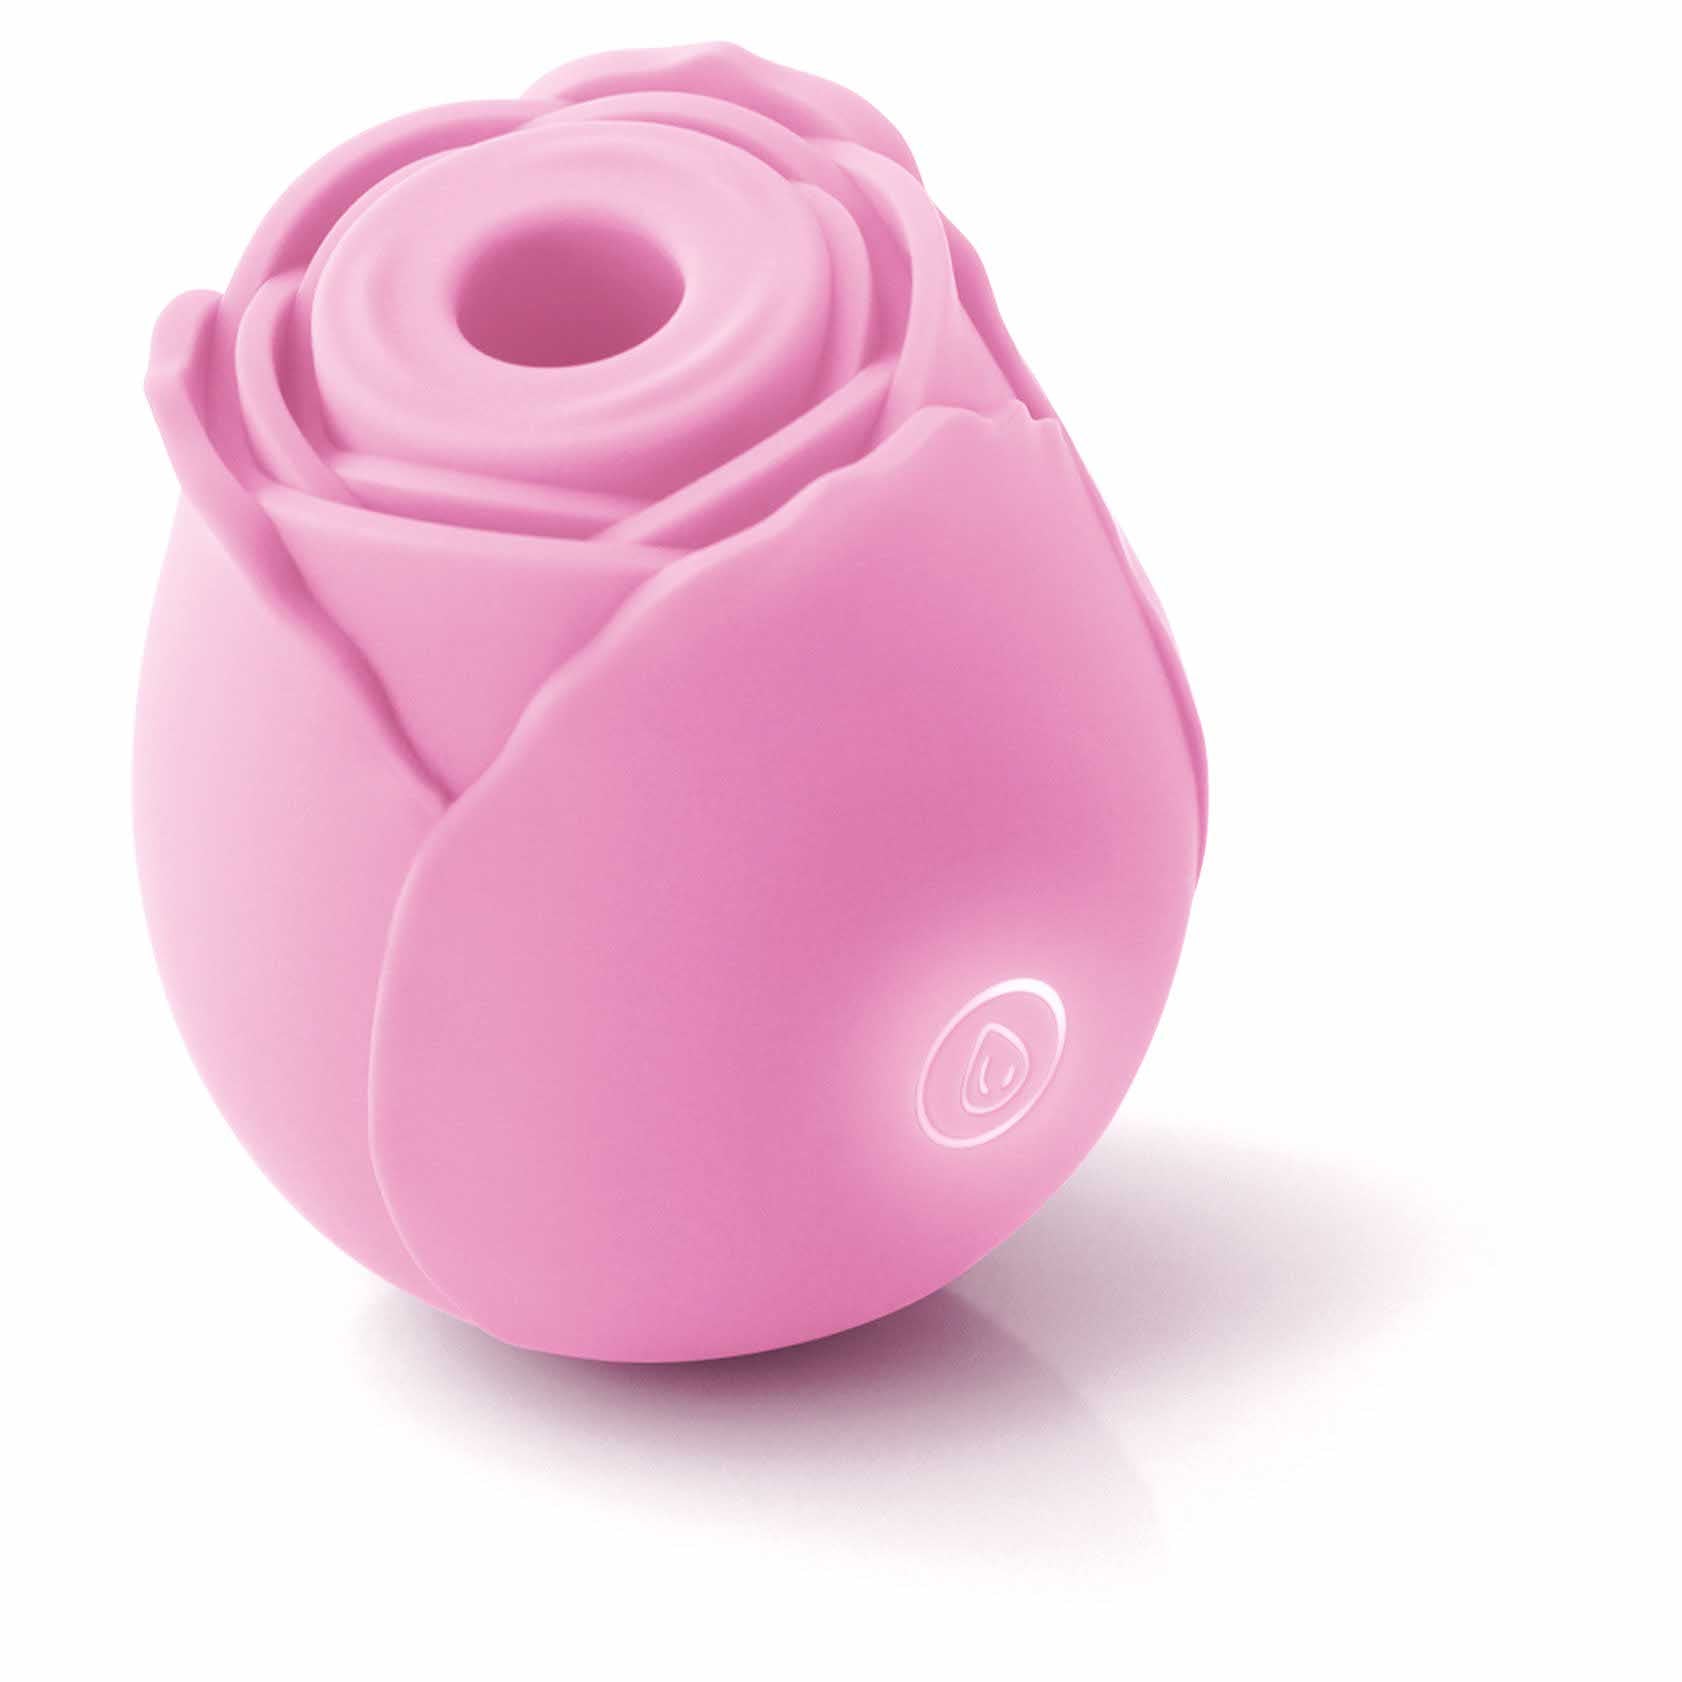 whole view of the ns novelties inya the rose vibrating air pulsator pink